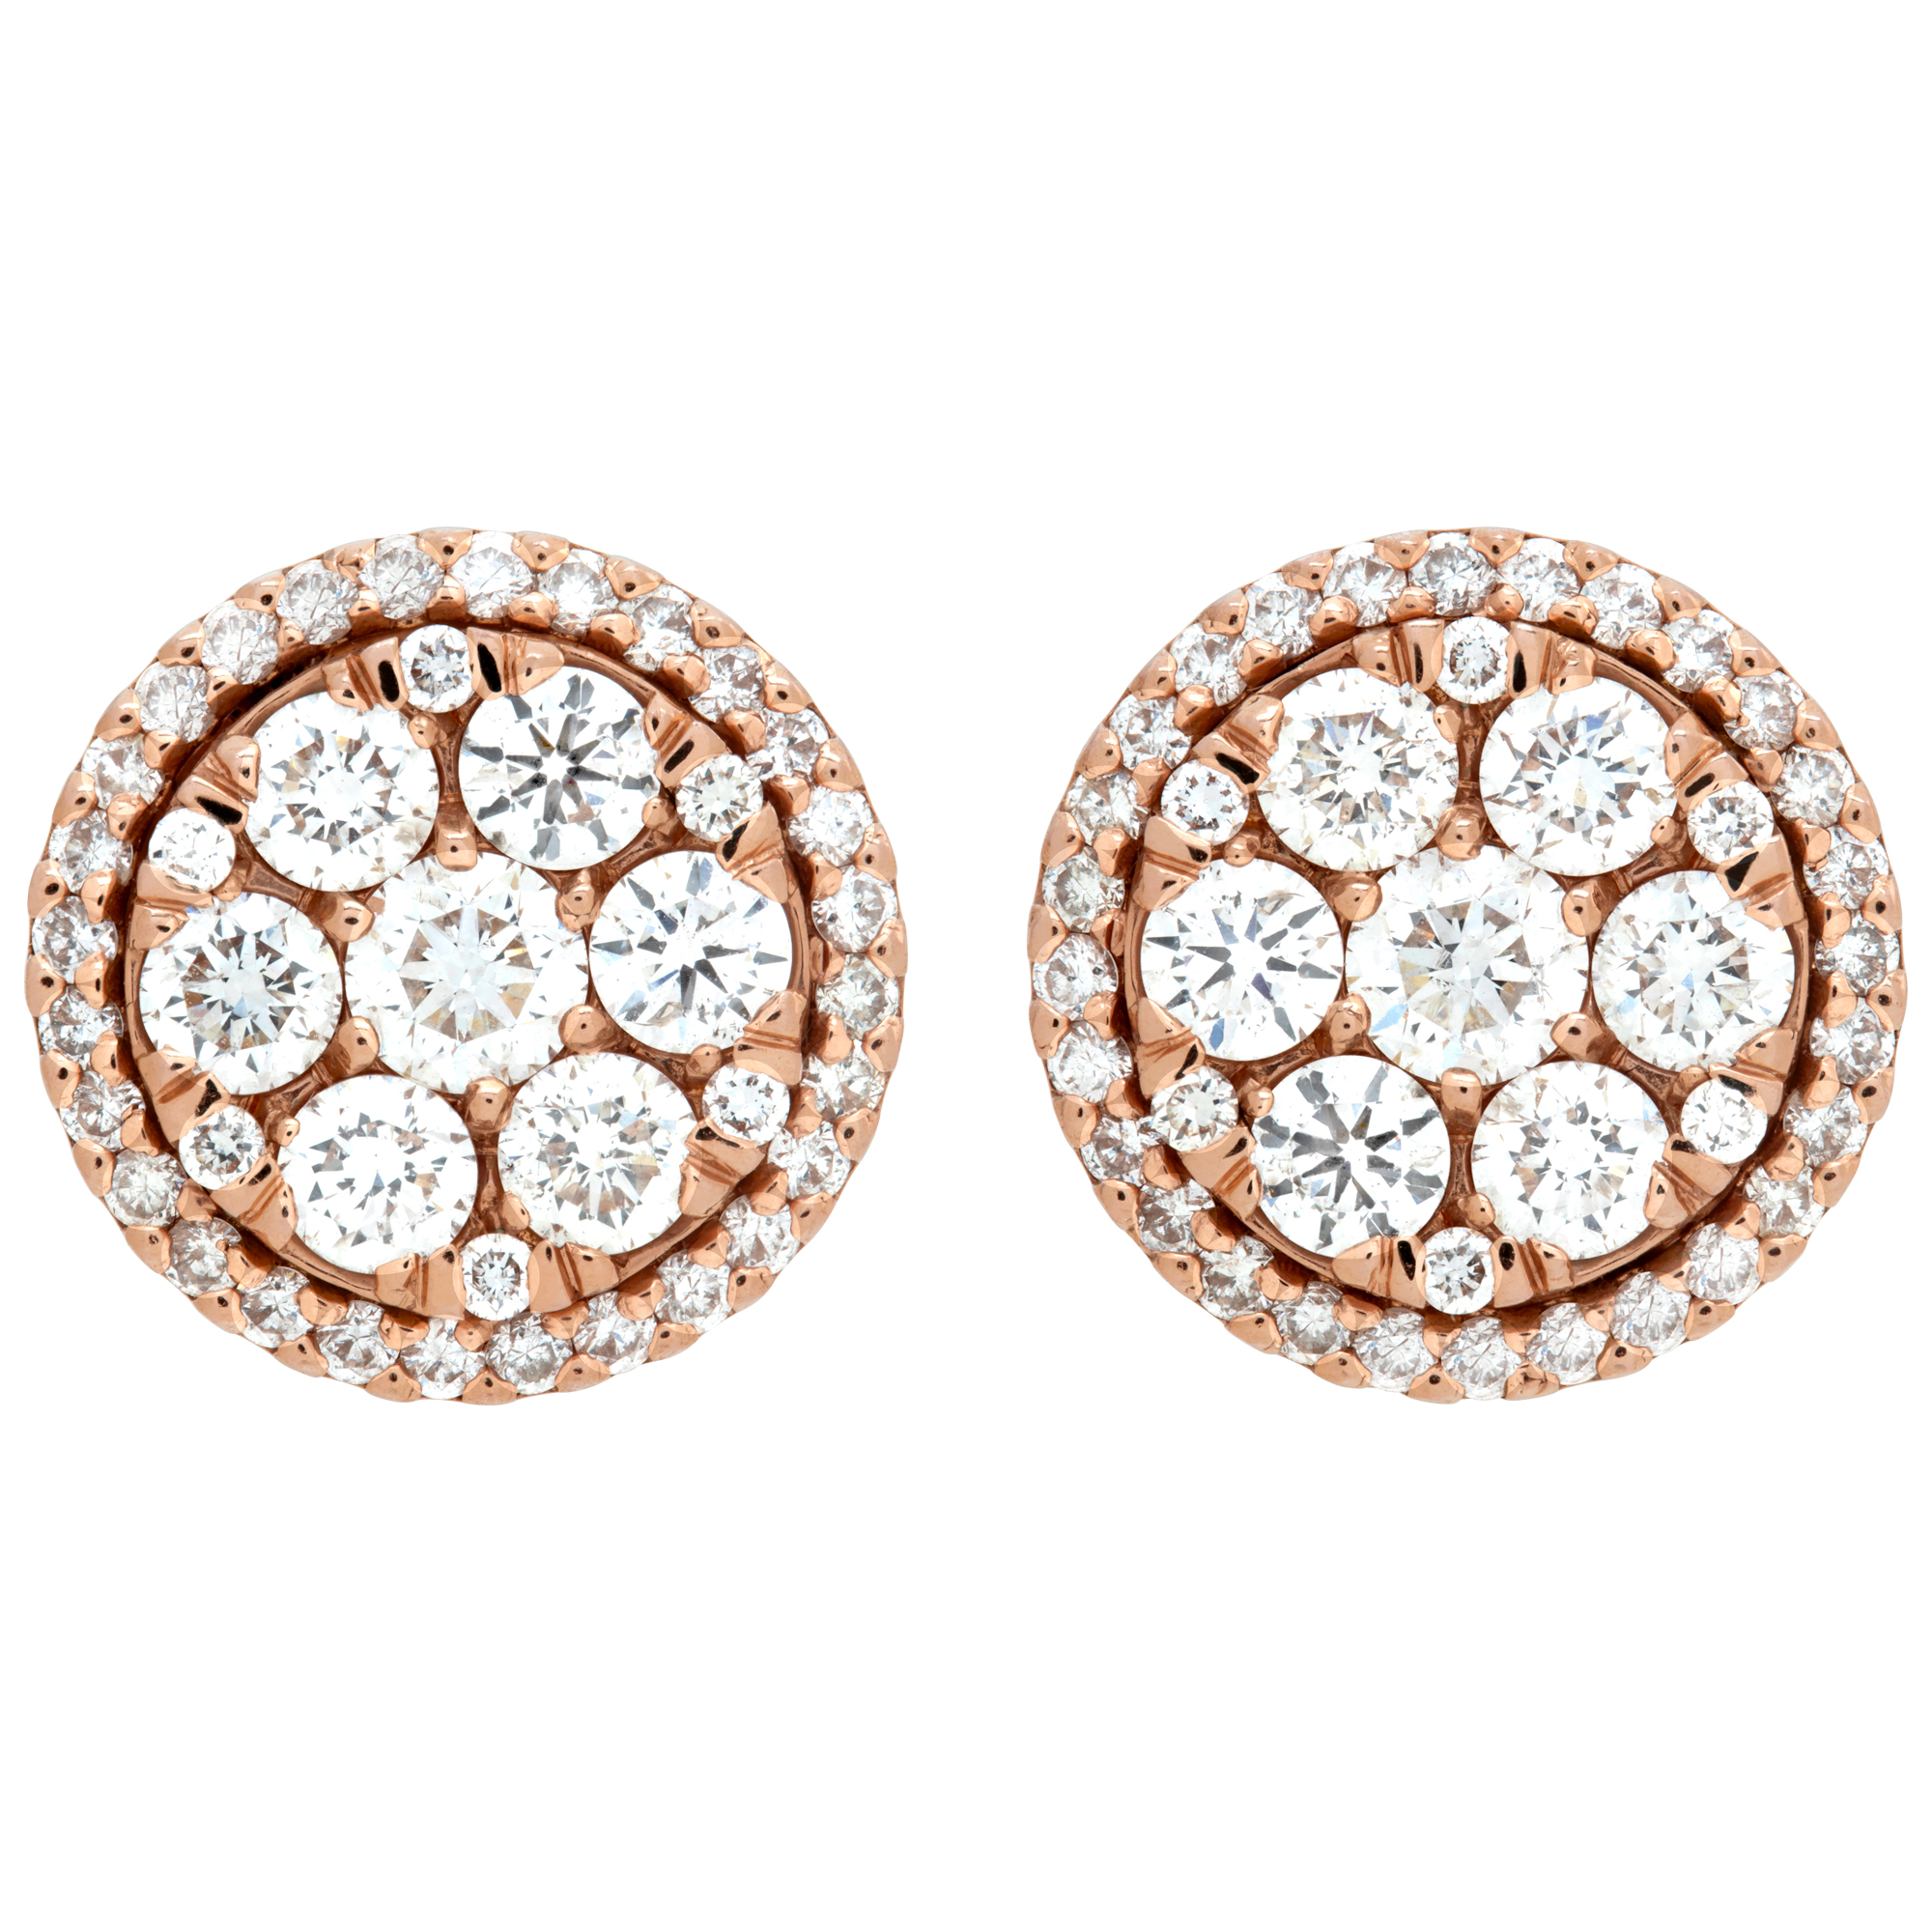 Diamond studs in 14k rose gold with over 2 carats in diamonds